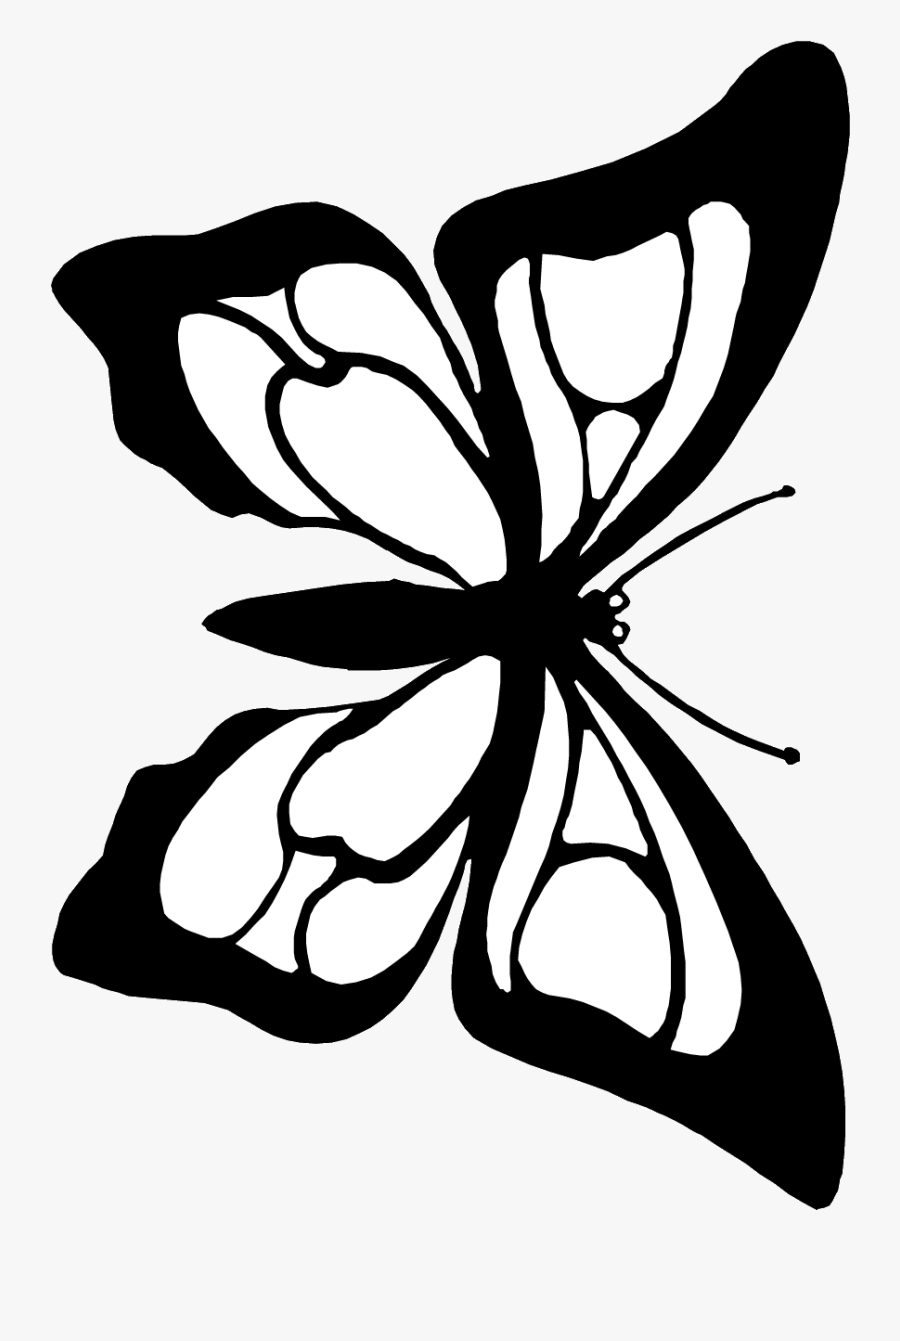 Download Butterfly Cutout Coloring Page - Butterfly Black White To Cut Out , Free Transparent Clipart ...